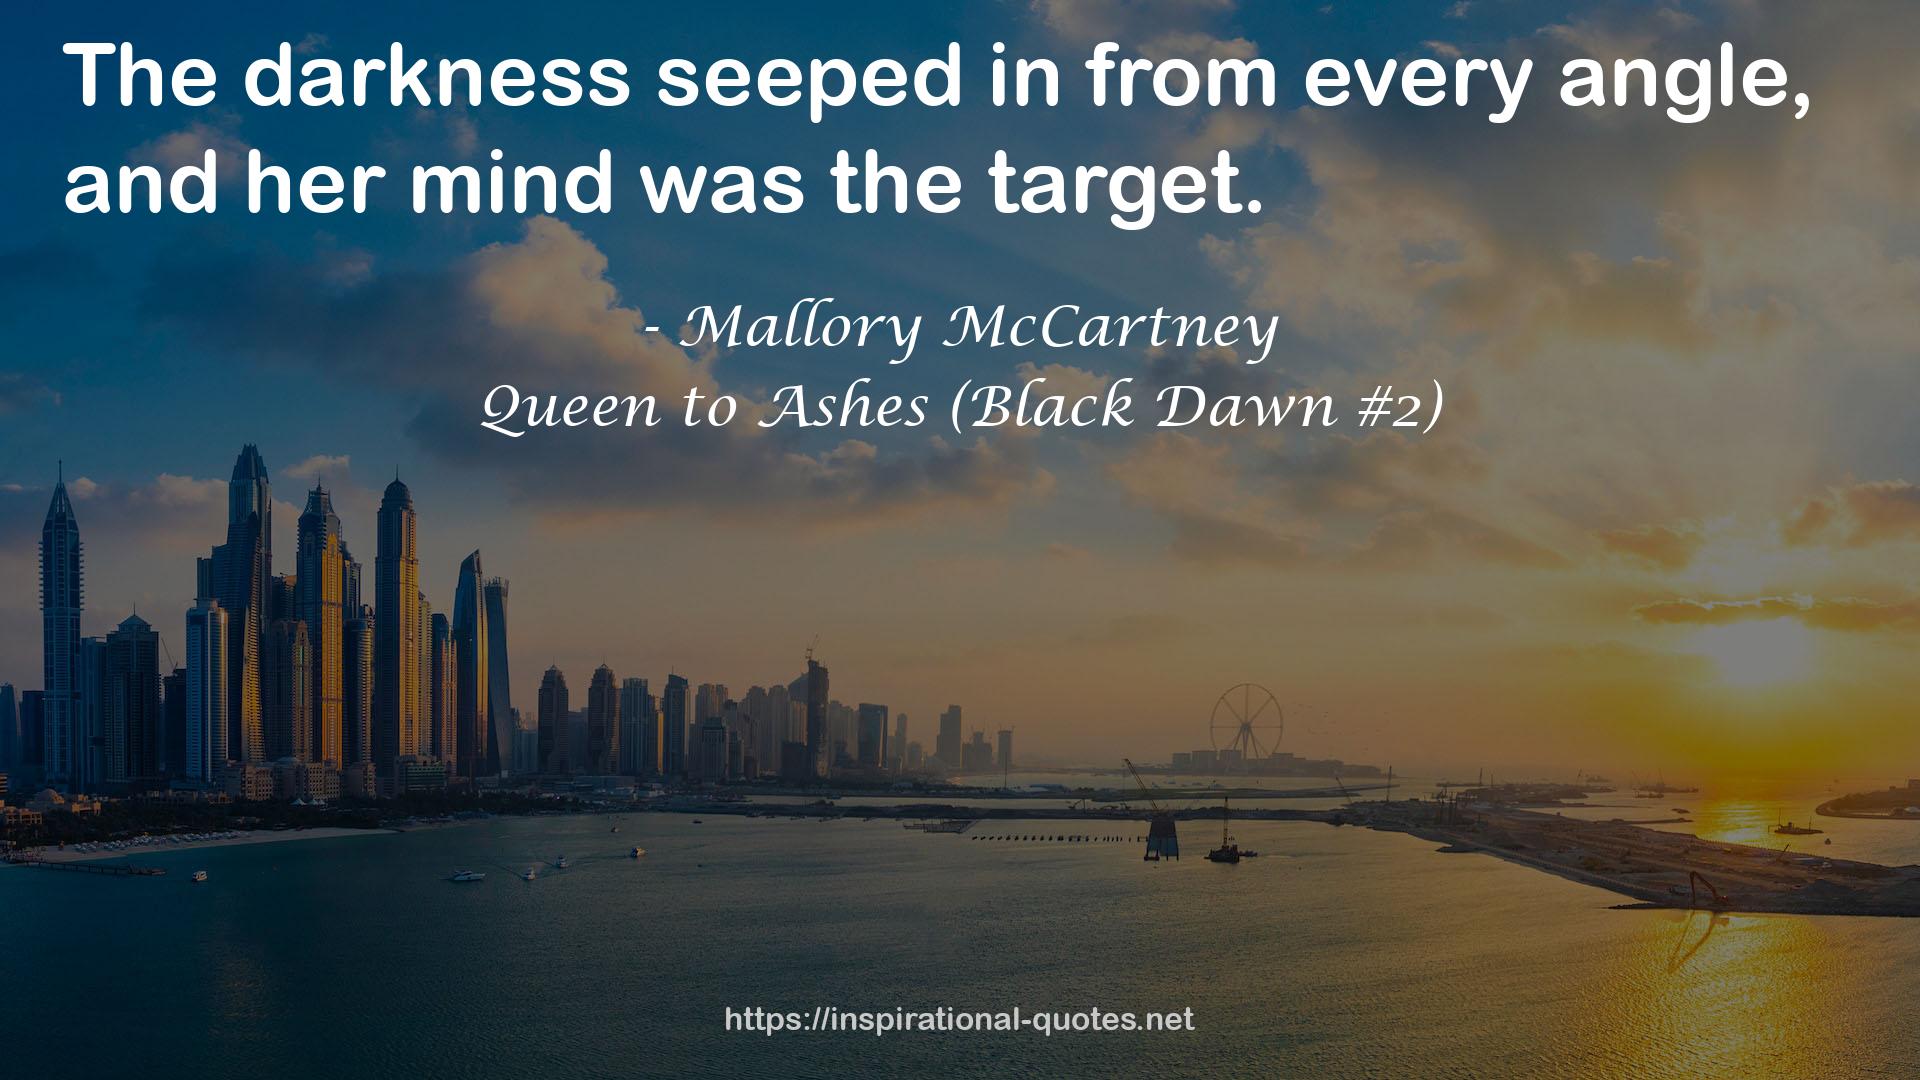 Queen to Ashes (Black Dawn #2) QUOTES